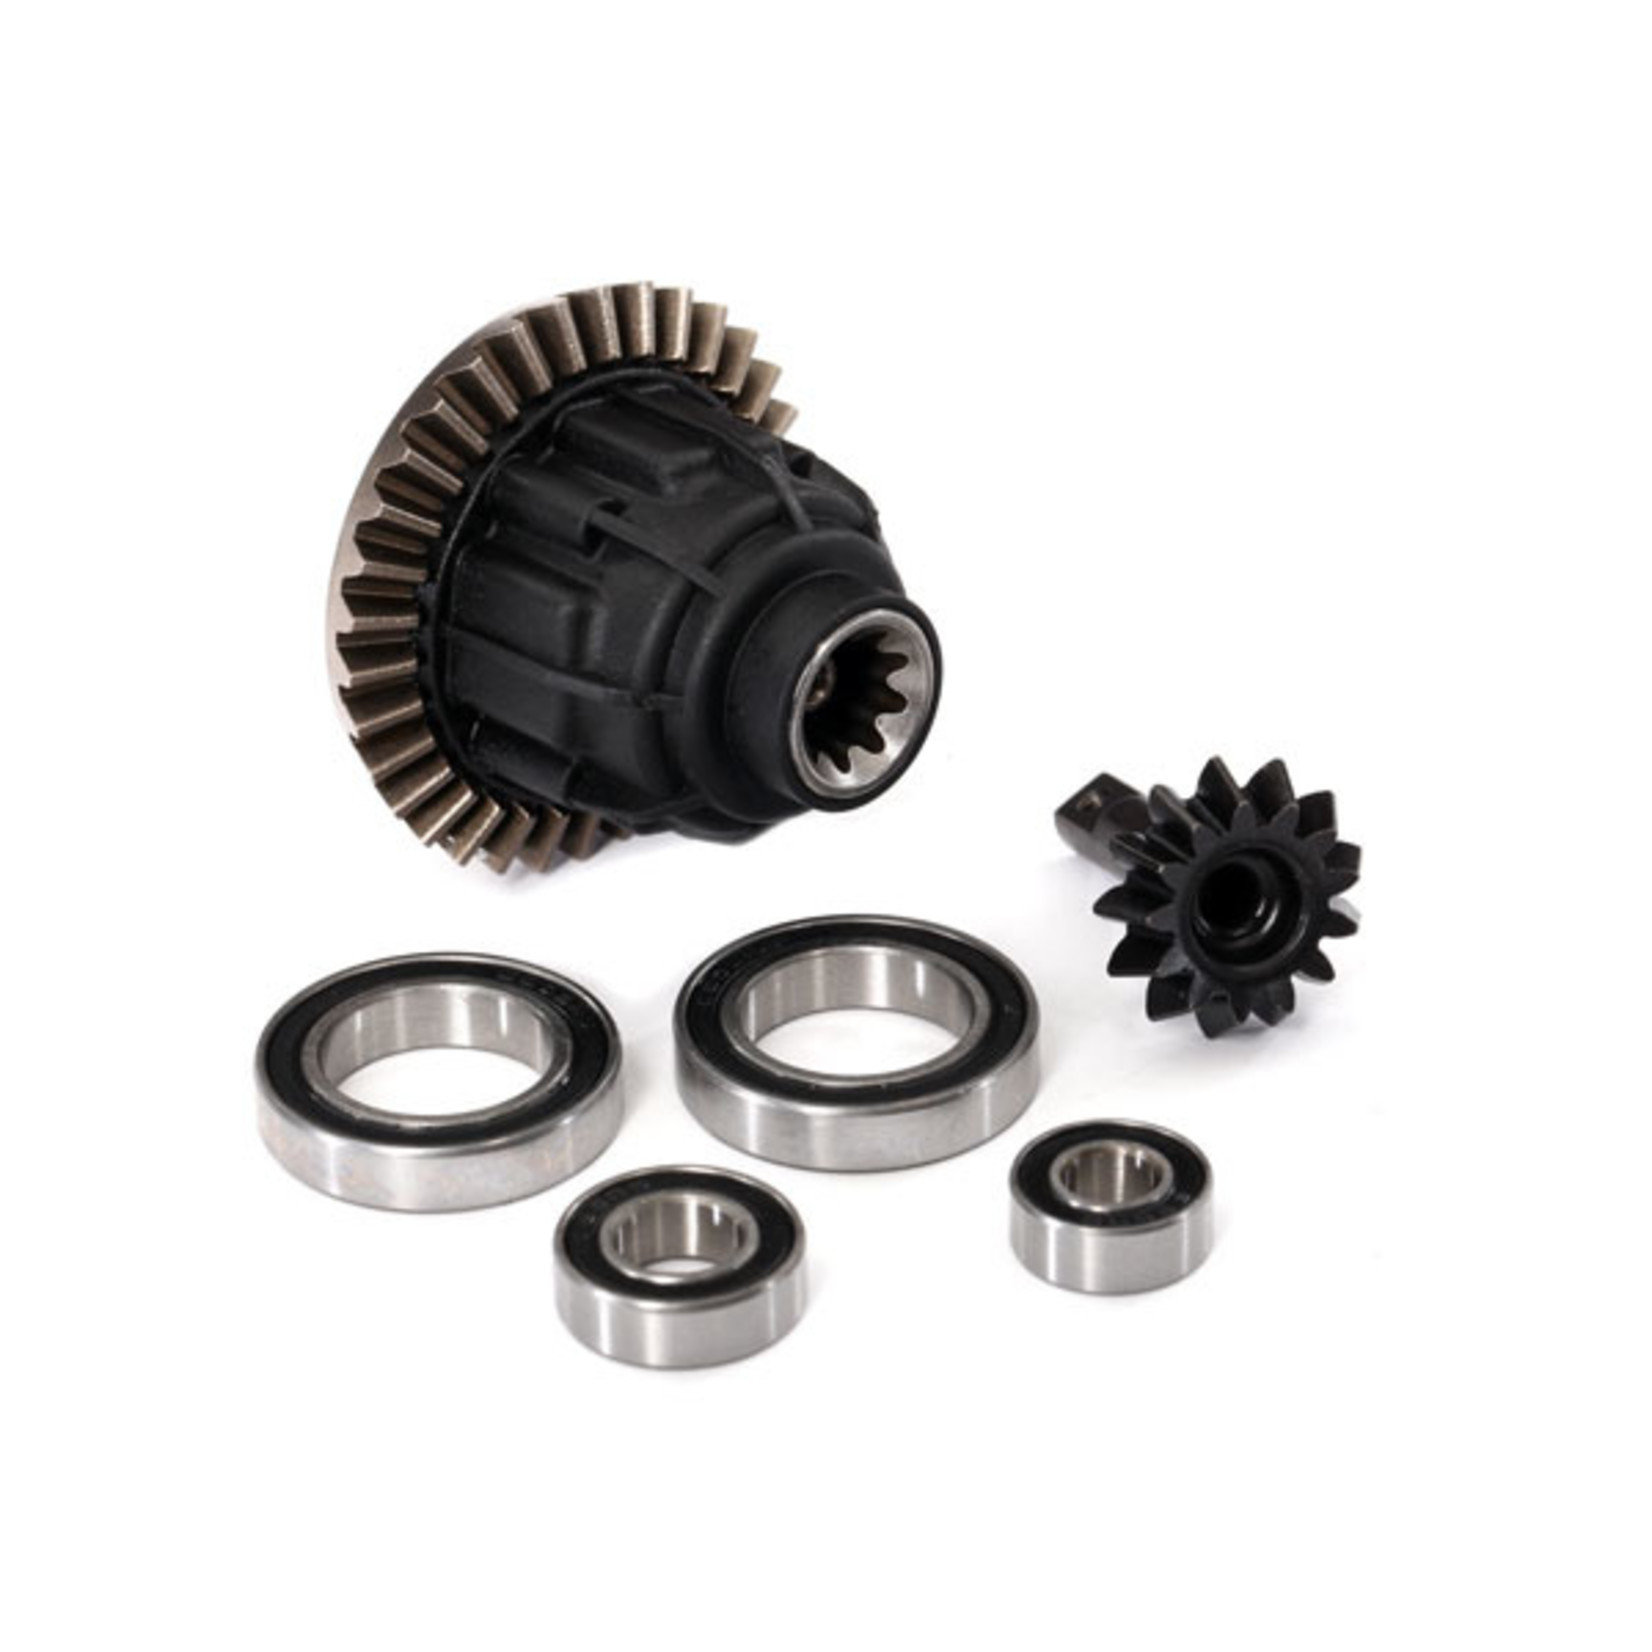 Traxxas 8572 - Differential, front, complete (fits Unlimit